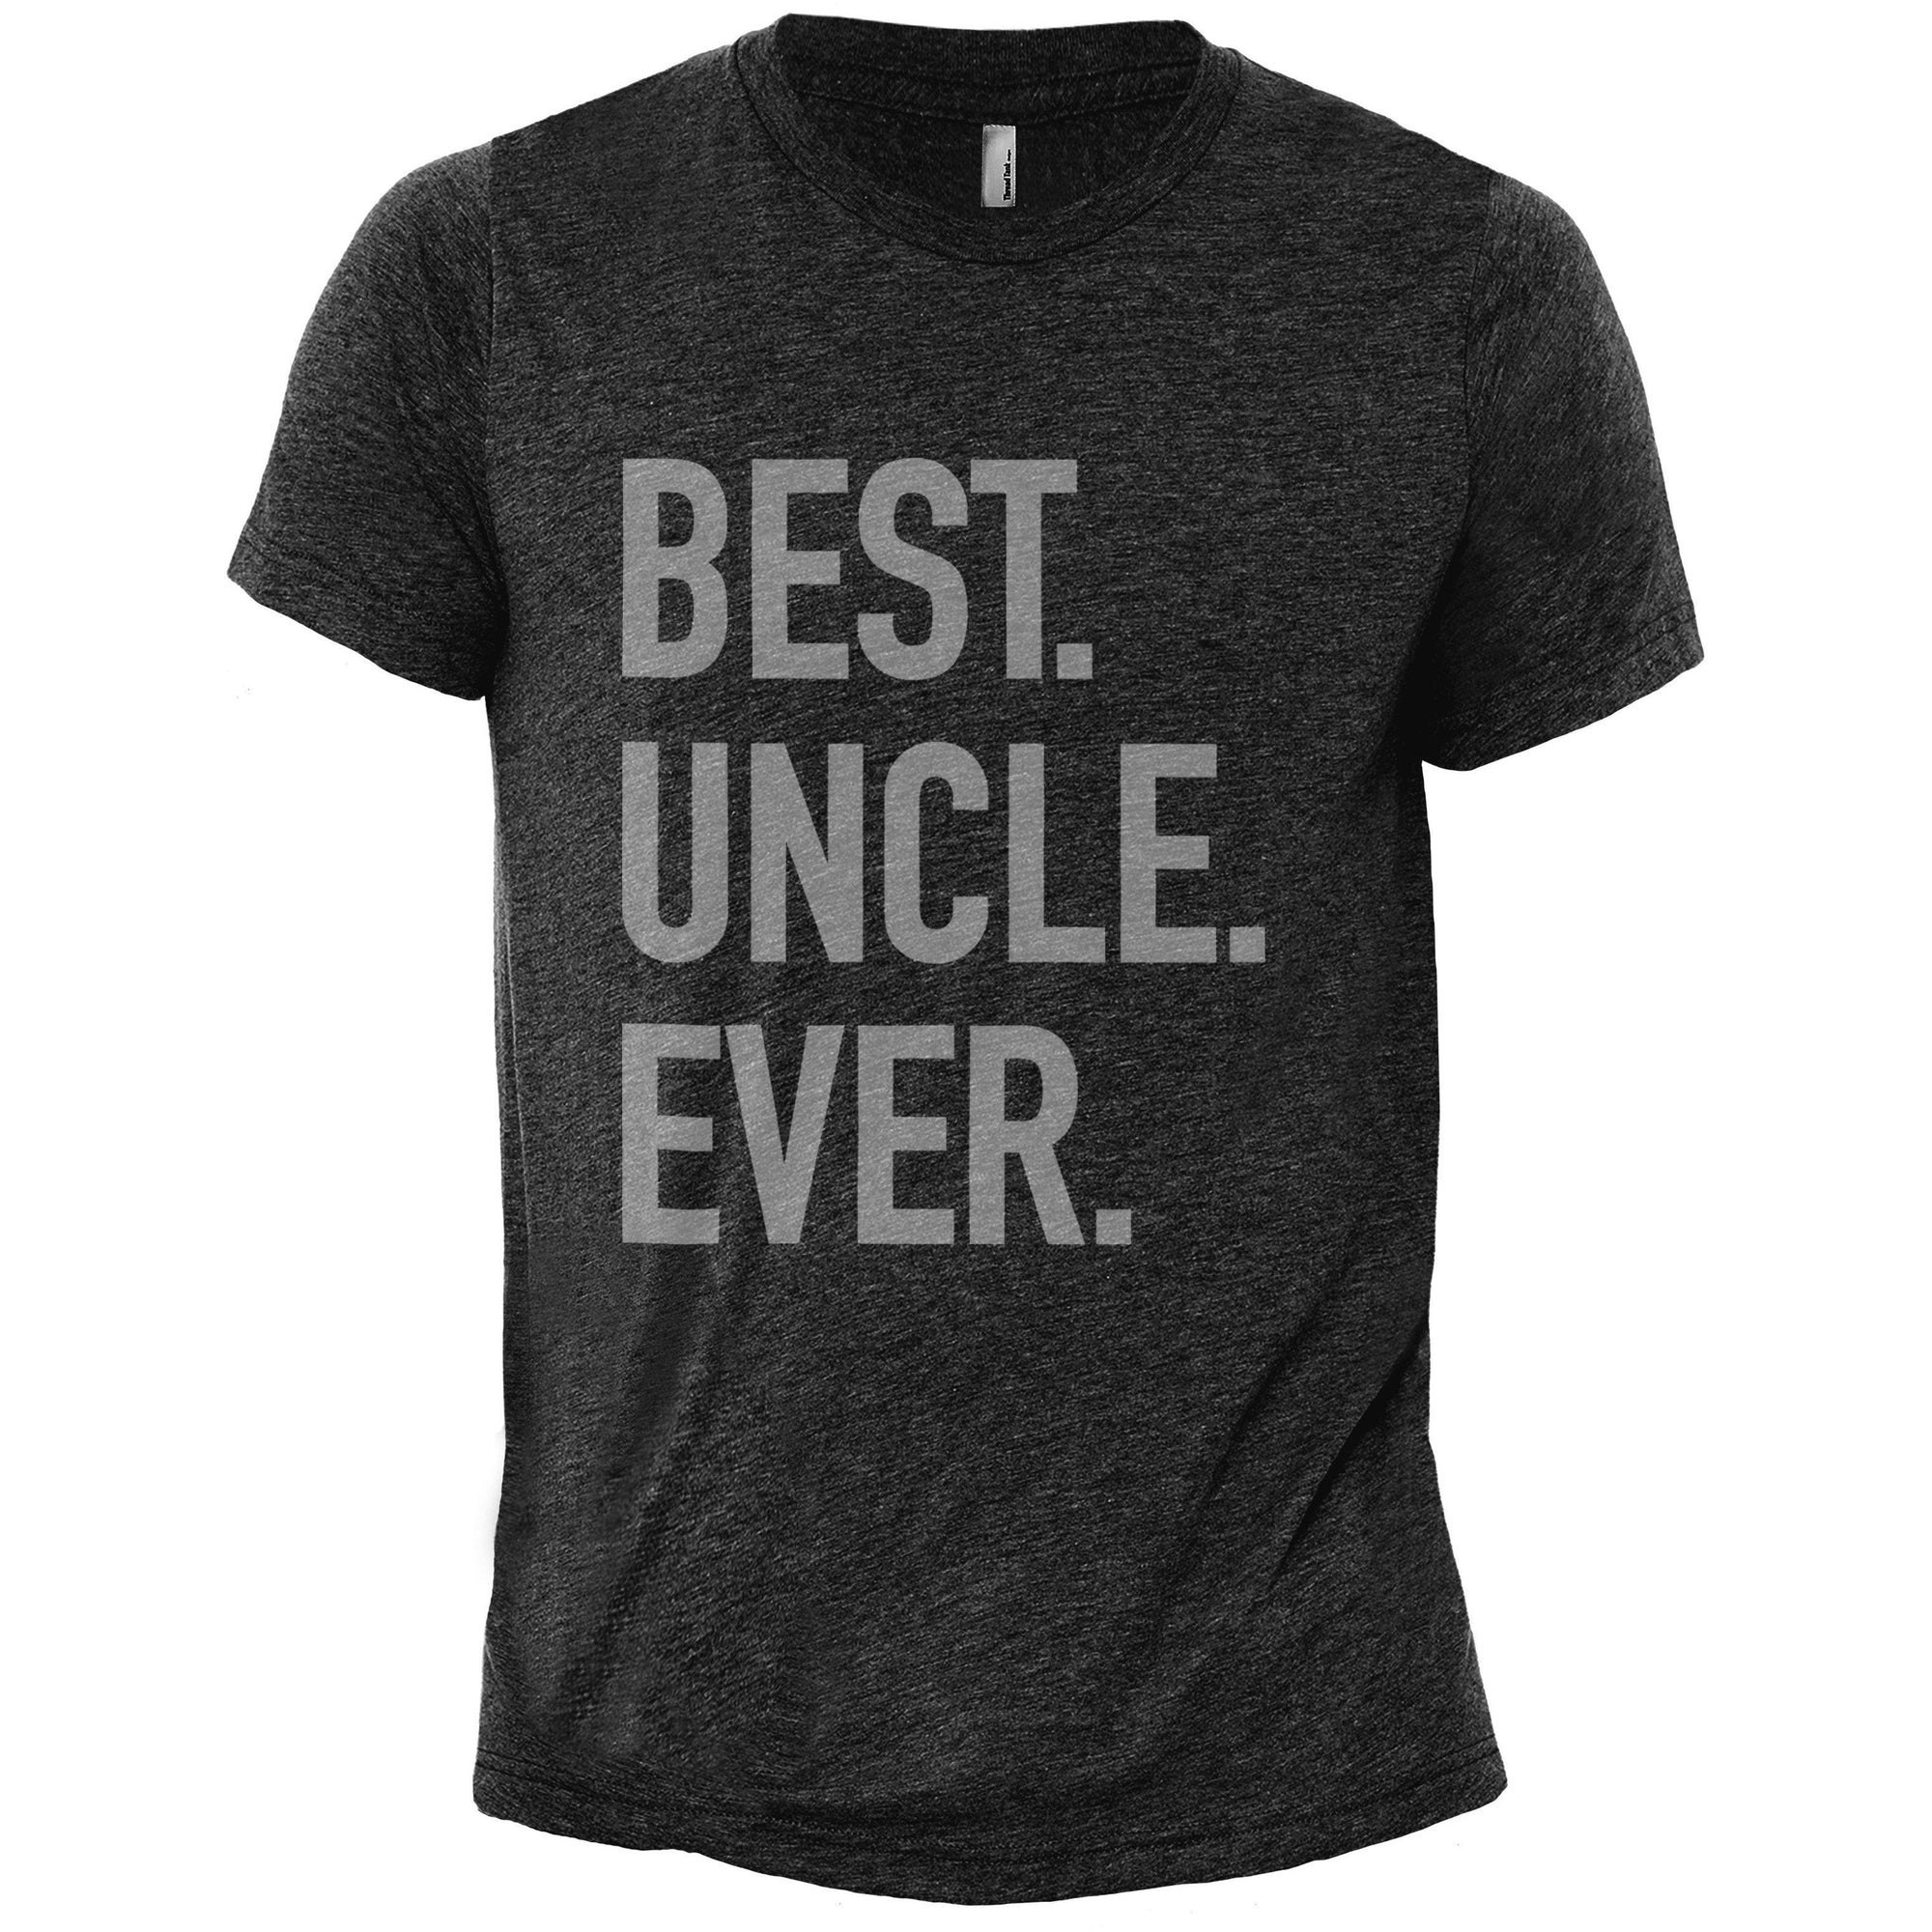 Best Uncle Ever Heather Grey Printed Graphic Men's Crew T-Shirt Tee